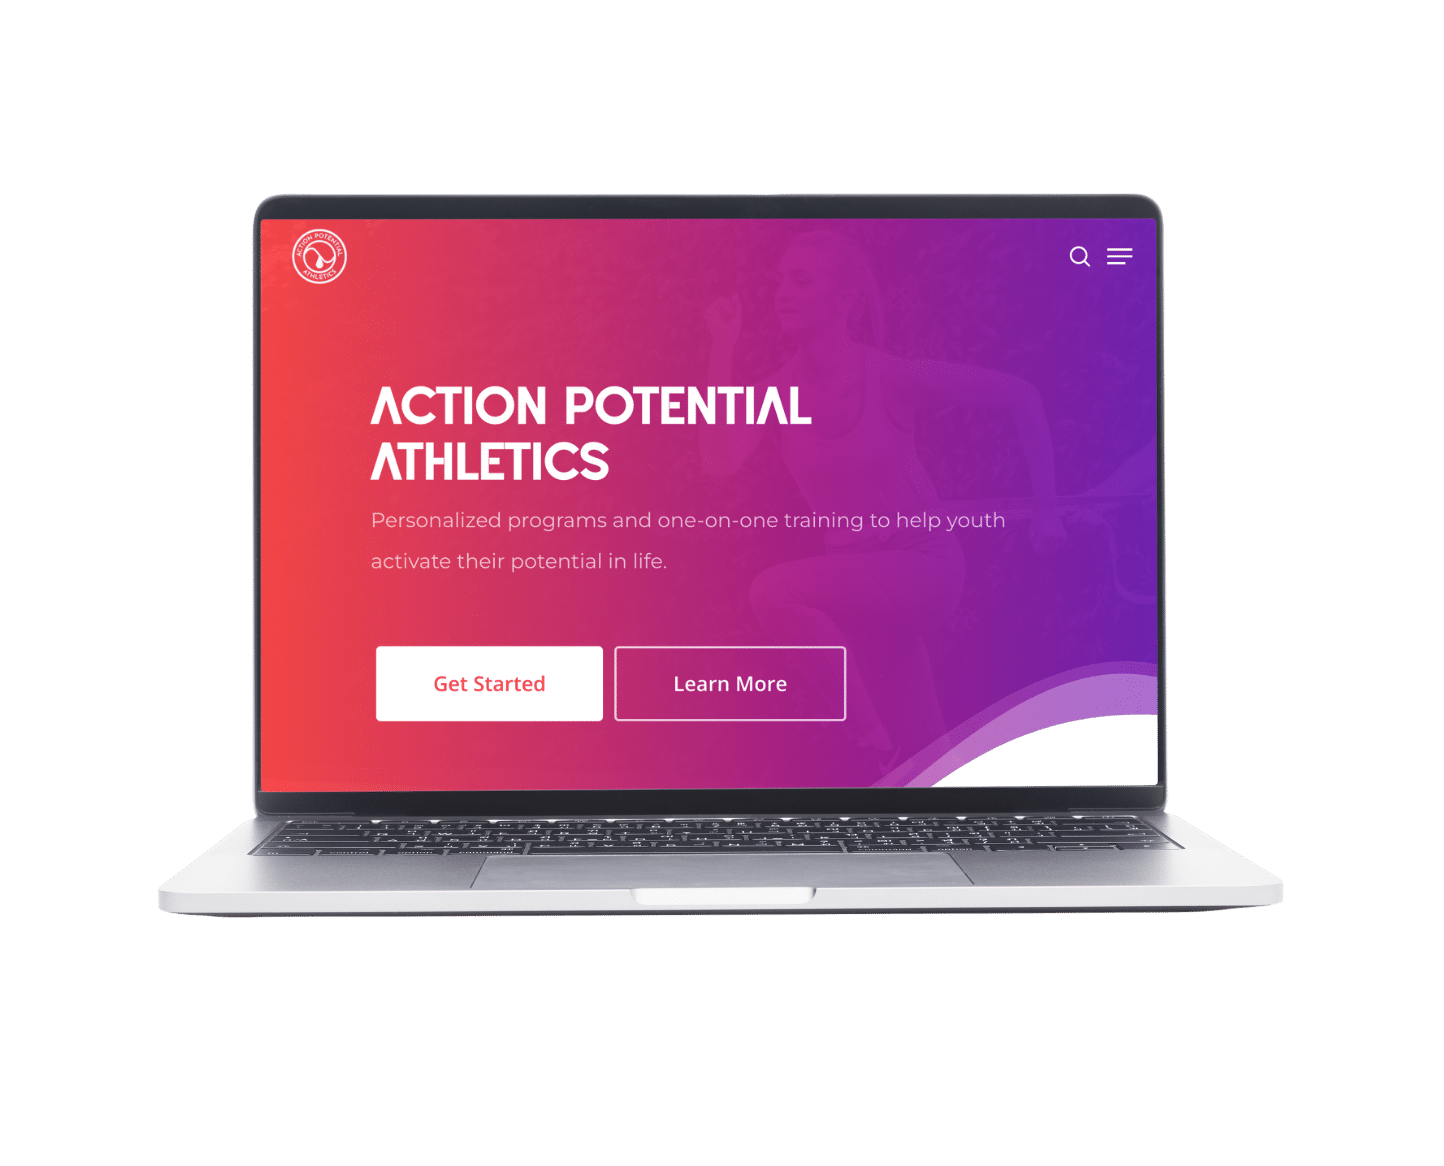 Action potential athletes computer mockup website landing page - brand strategy and web design by Big Red Jelly